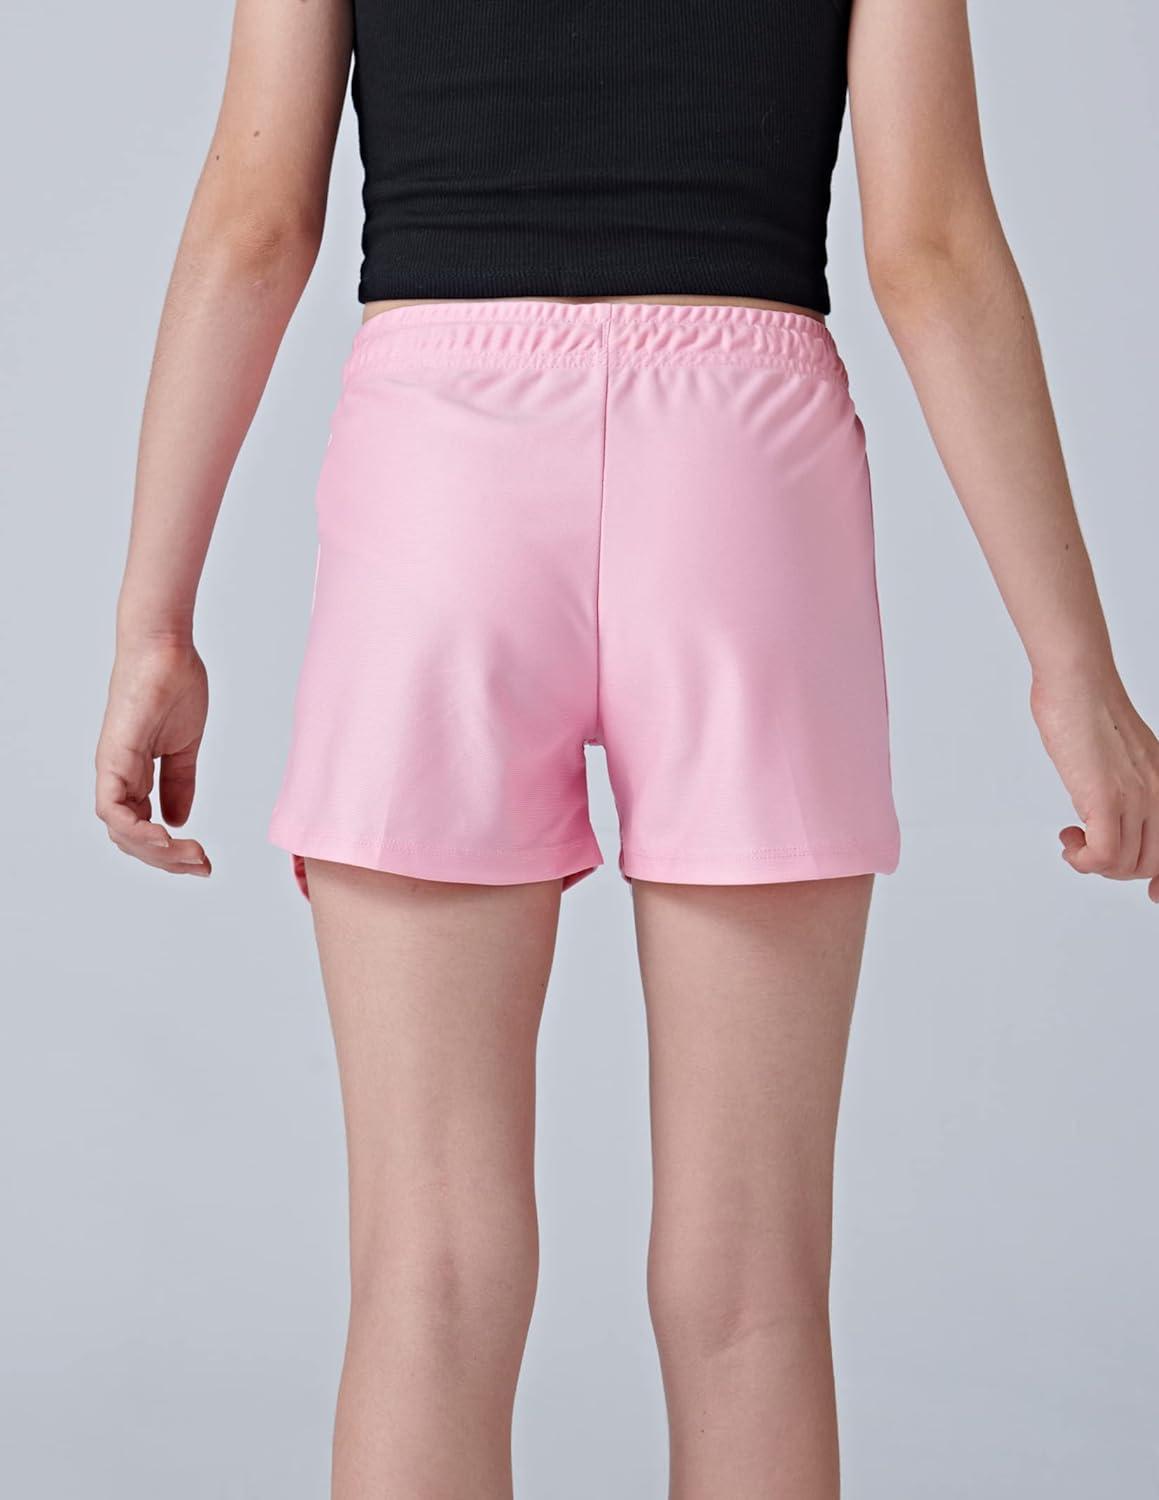 Custom Variety Pack Activewear Athletic Shorts for Women